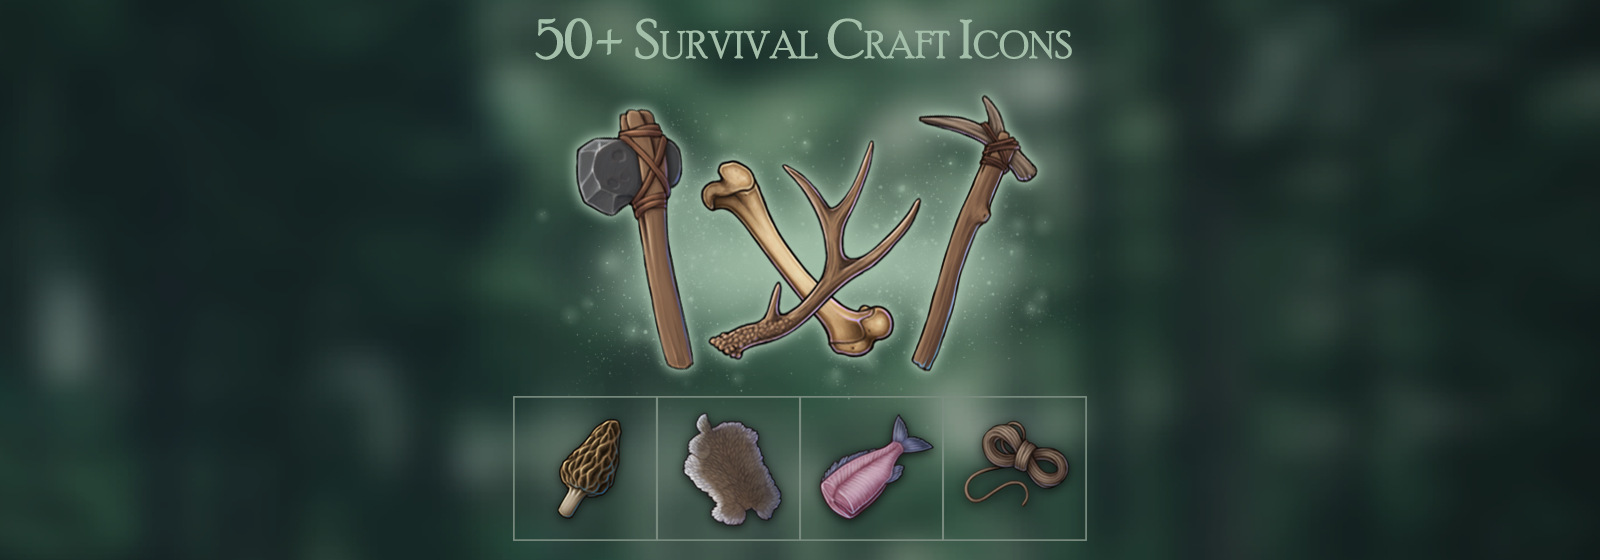 50+ Survival Craft Icons